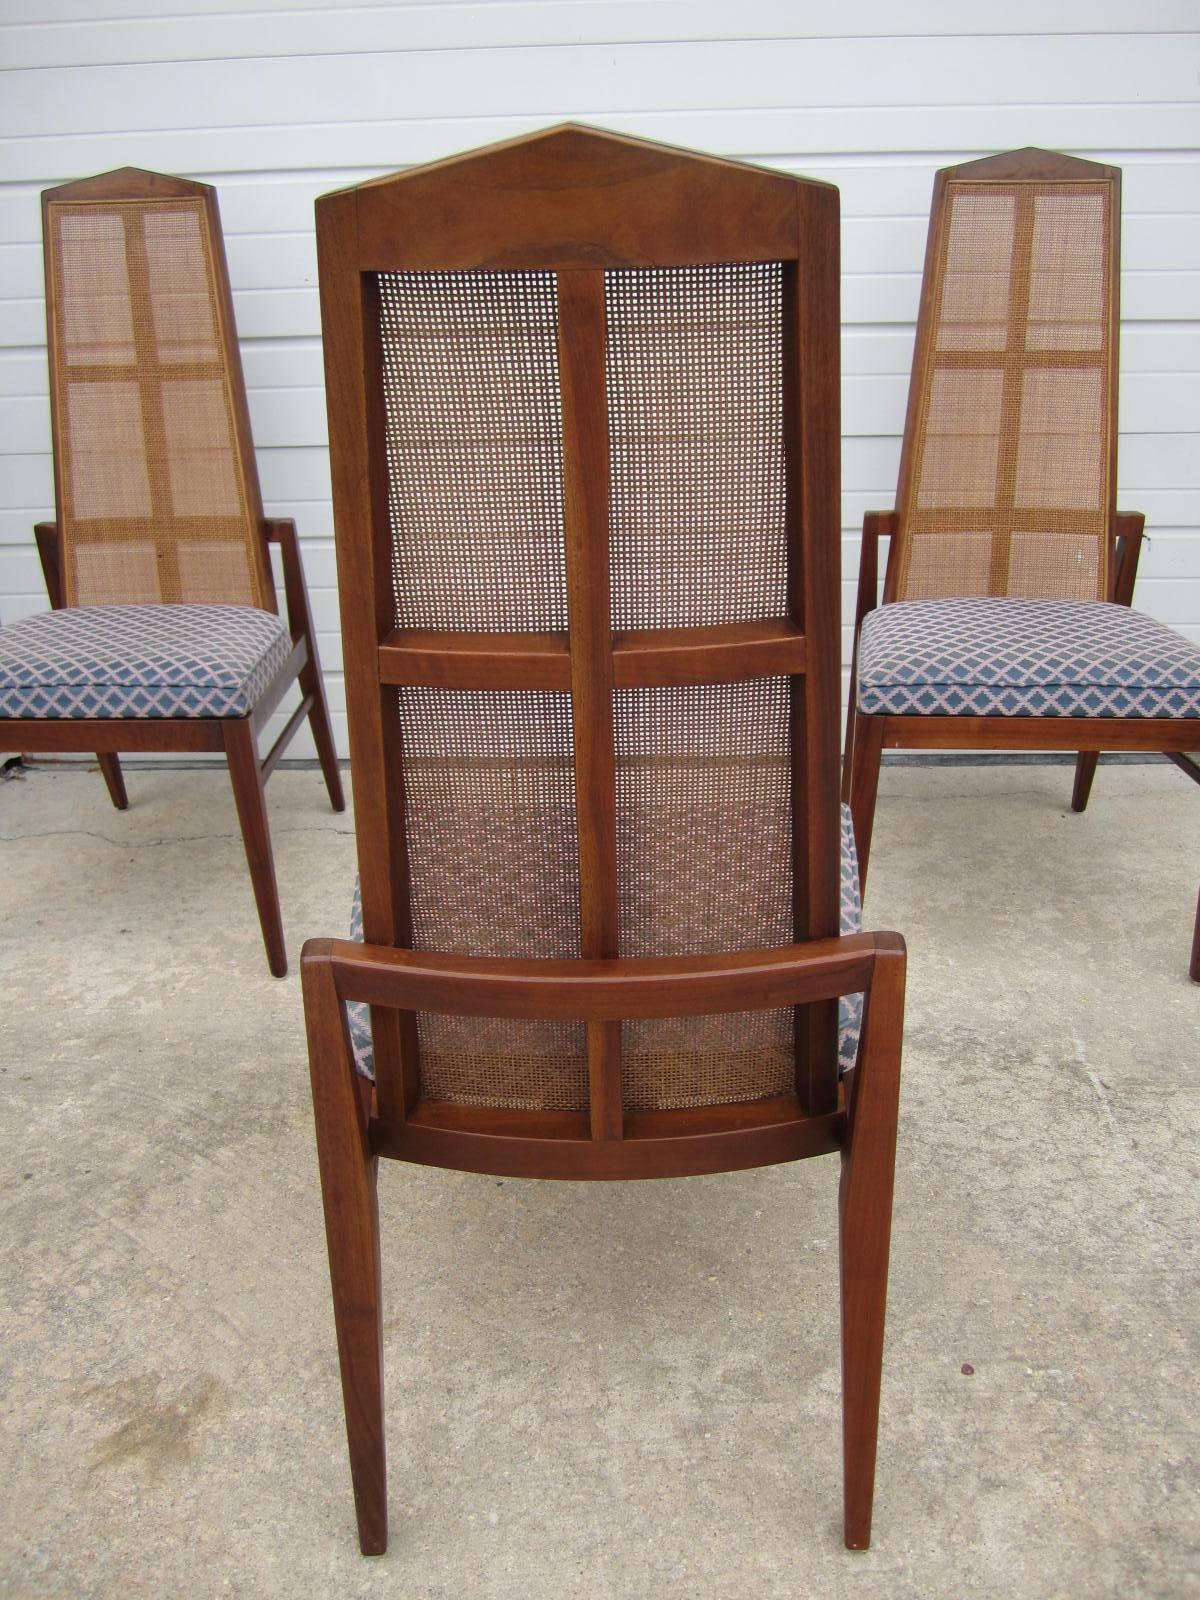 5 Walnut Foster and McDavid Cane-Back Dining Chairs, Mid-Century Modern In Good Condition For Sale In Pemberton, NJ